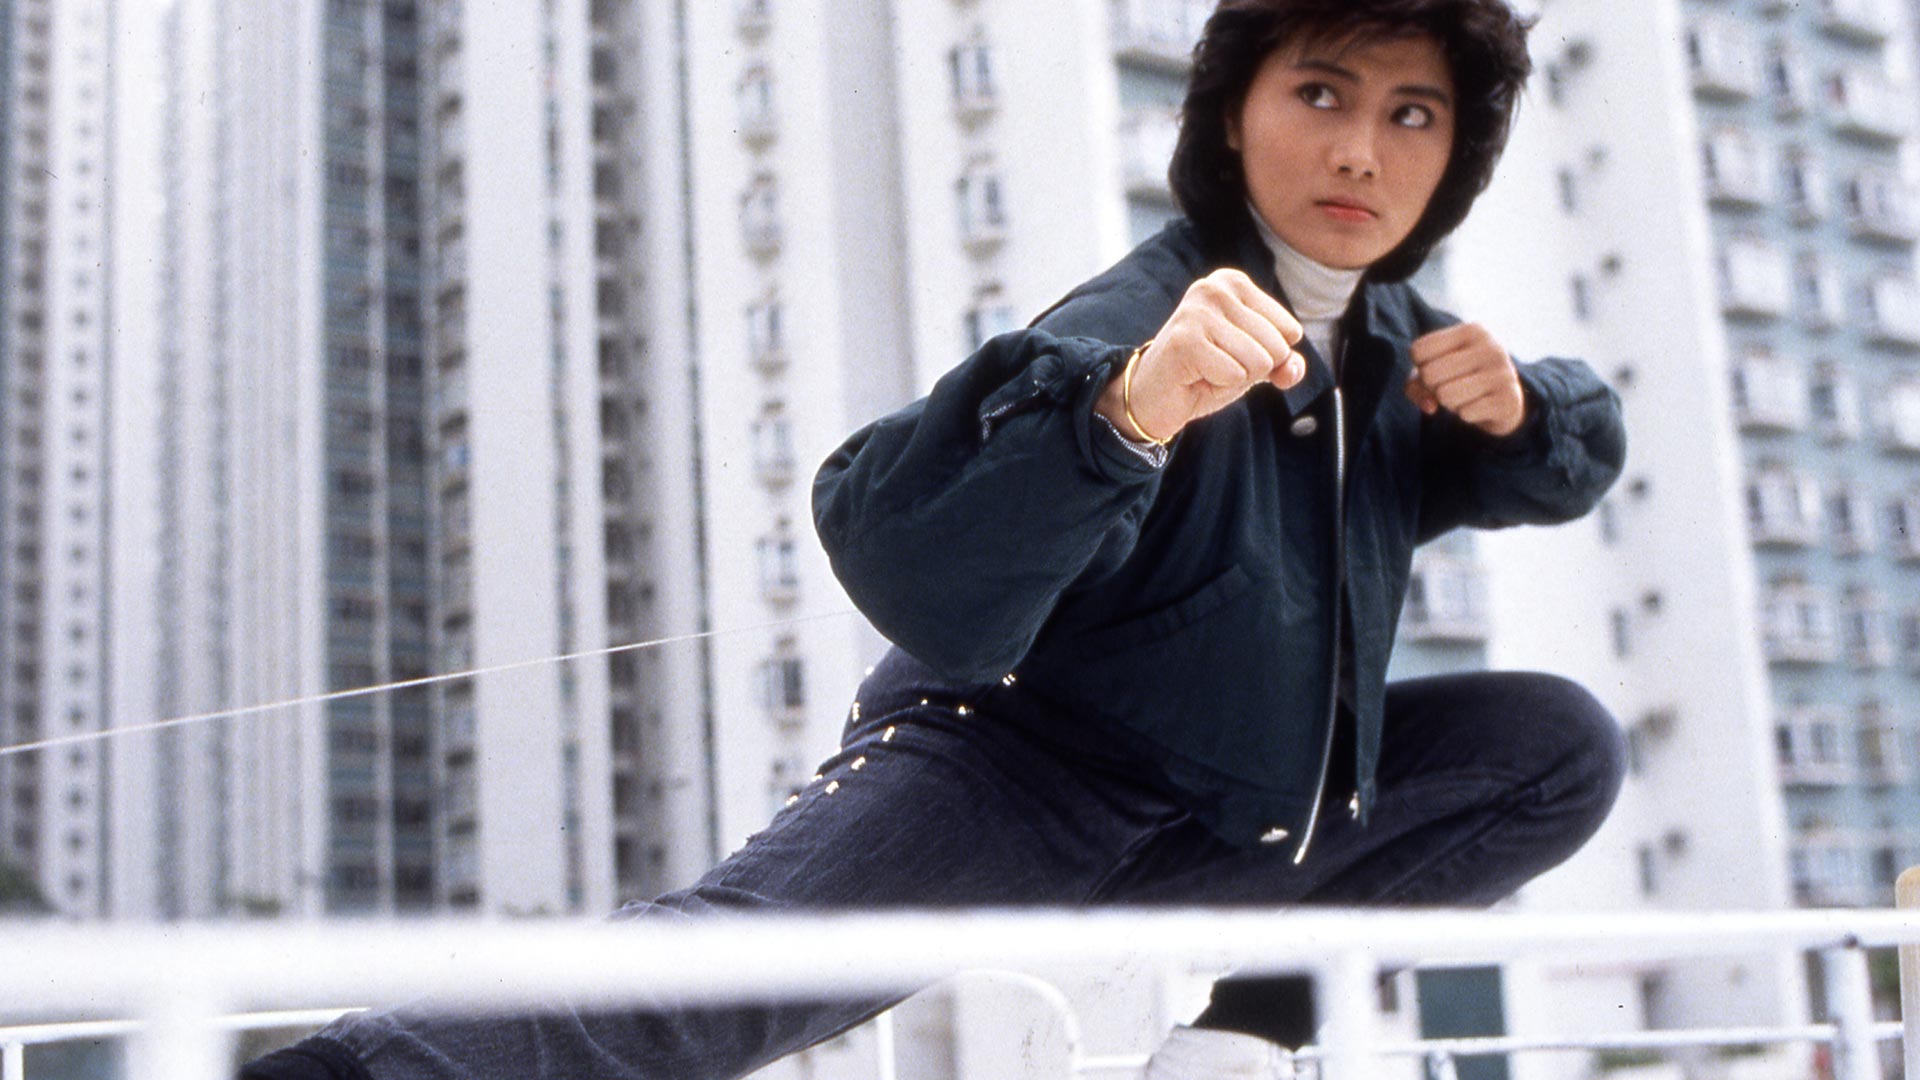 Cynthia Khan strikes a fierce pose, ready to fight, in In the Line of Duty IV.